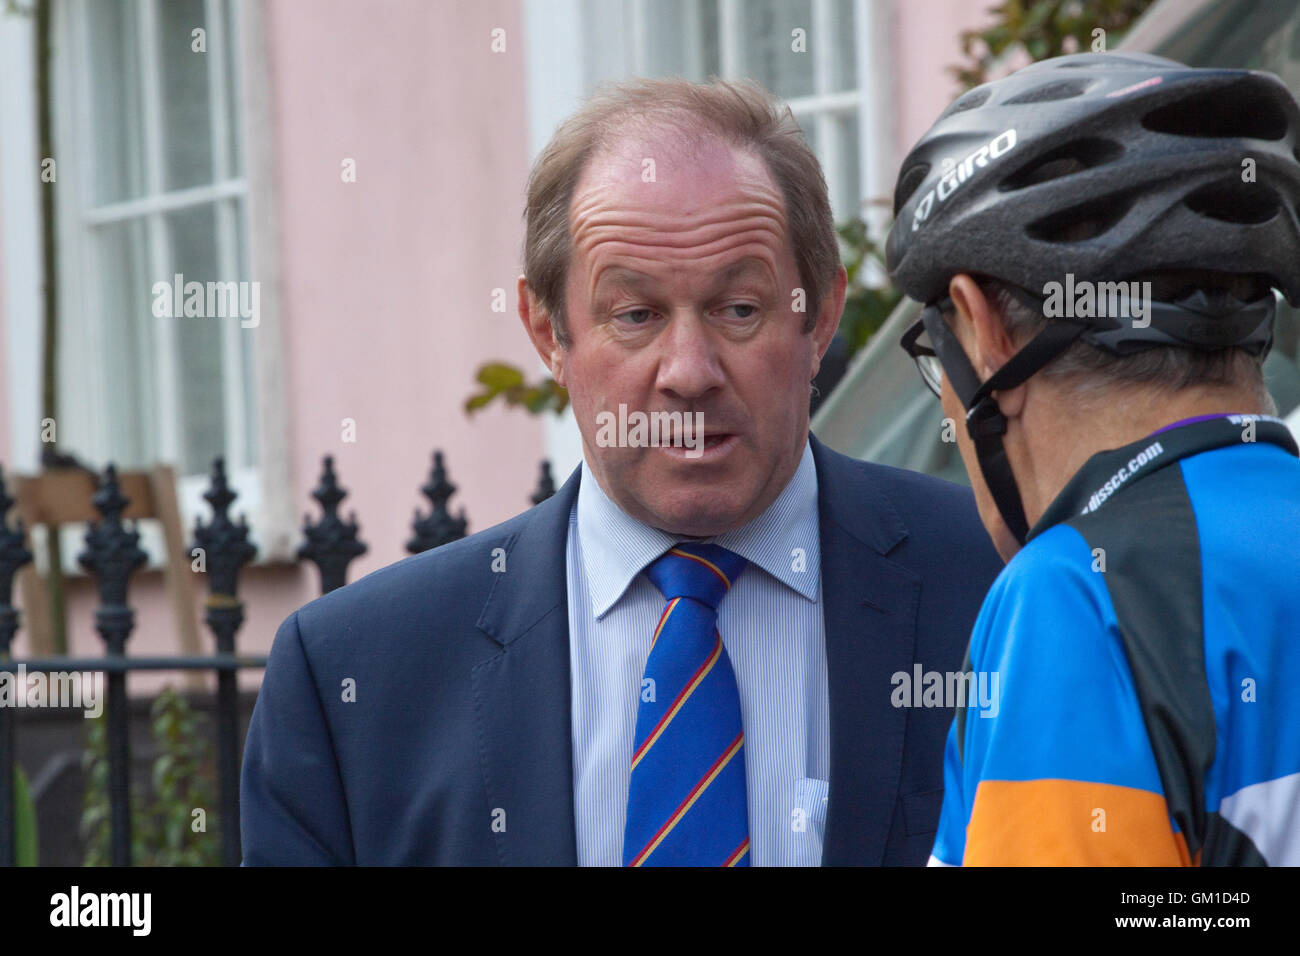 Suffolk Police and Crime Commissioner Tim Passmore in conversation with a cyclist Stock Photo